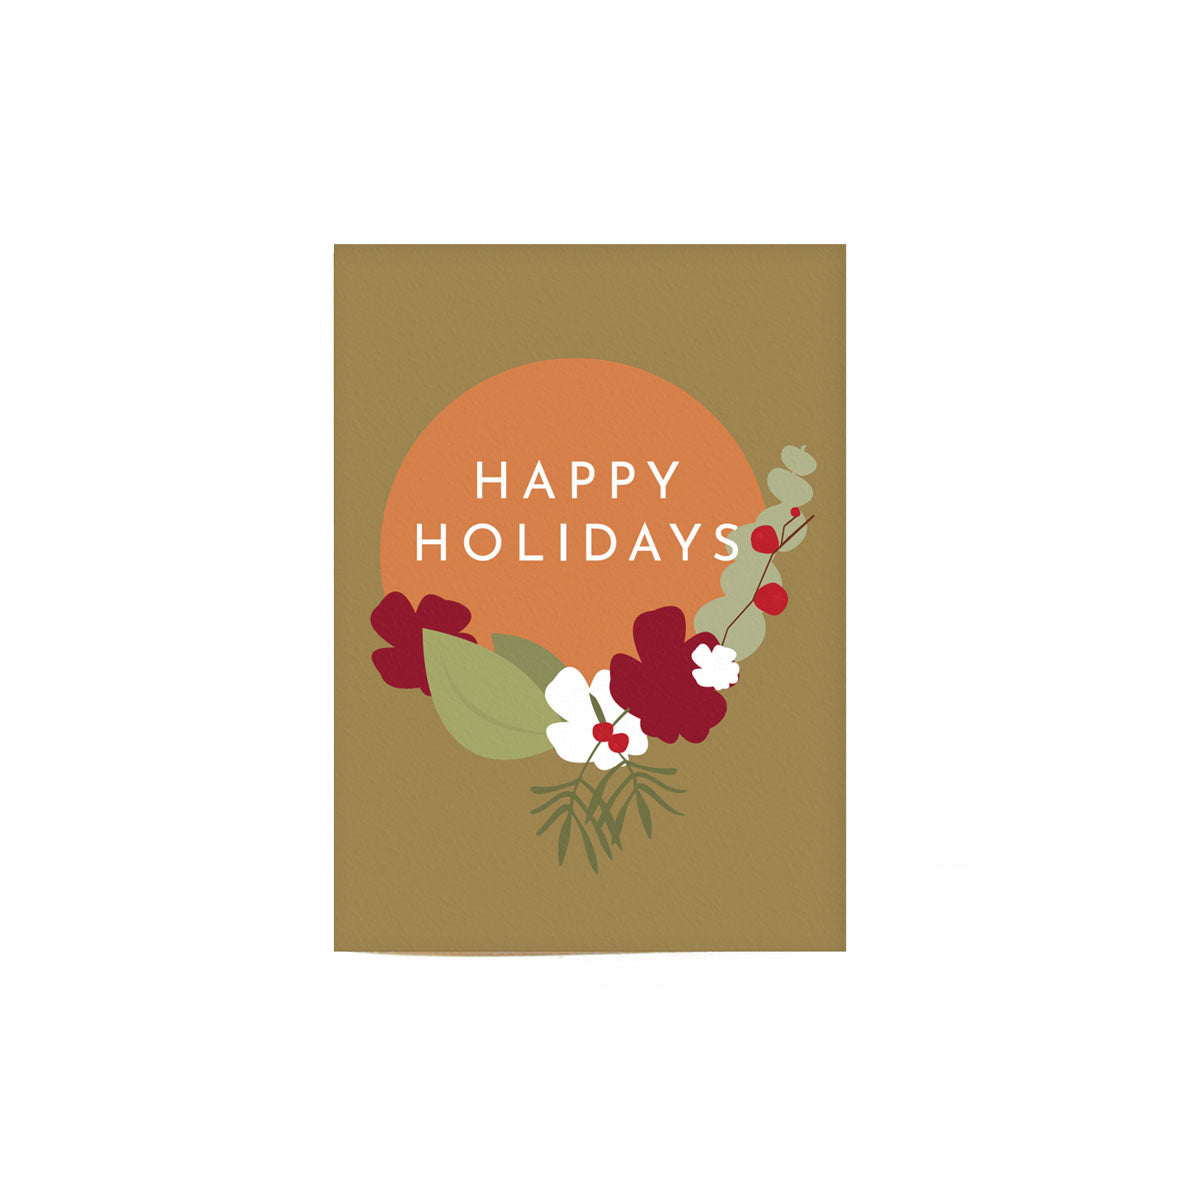 greenish brown holiday floral greeting card that reads "happy holidays" and illustrates green, red and white flowers.